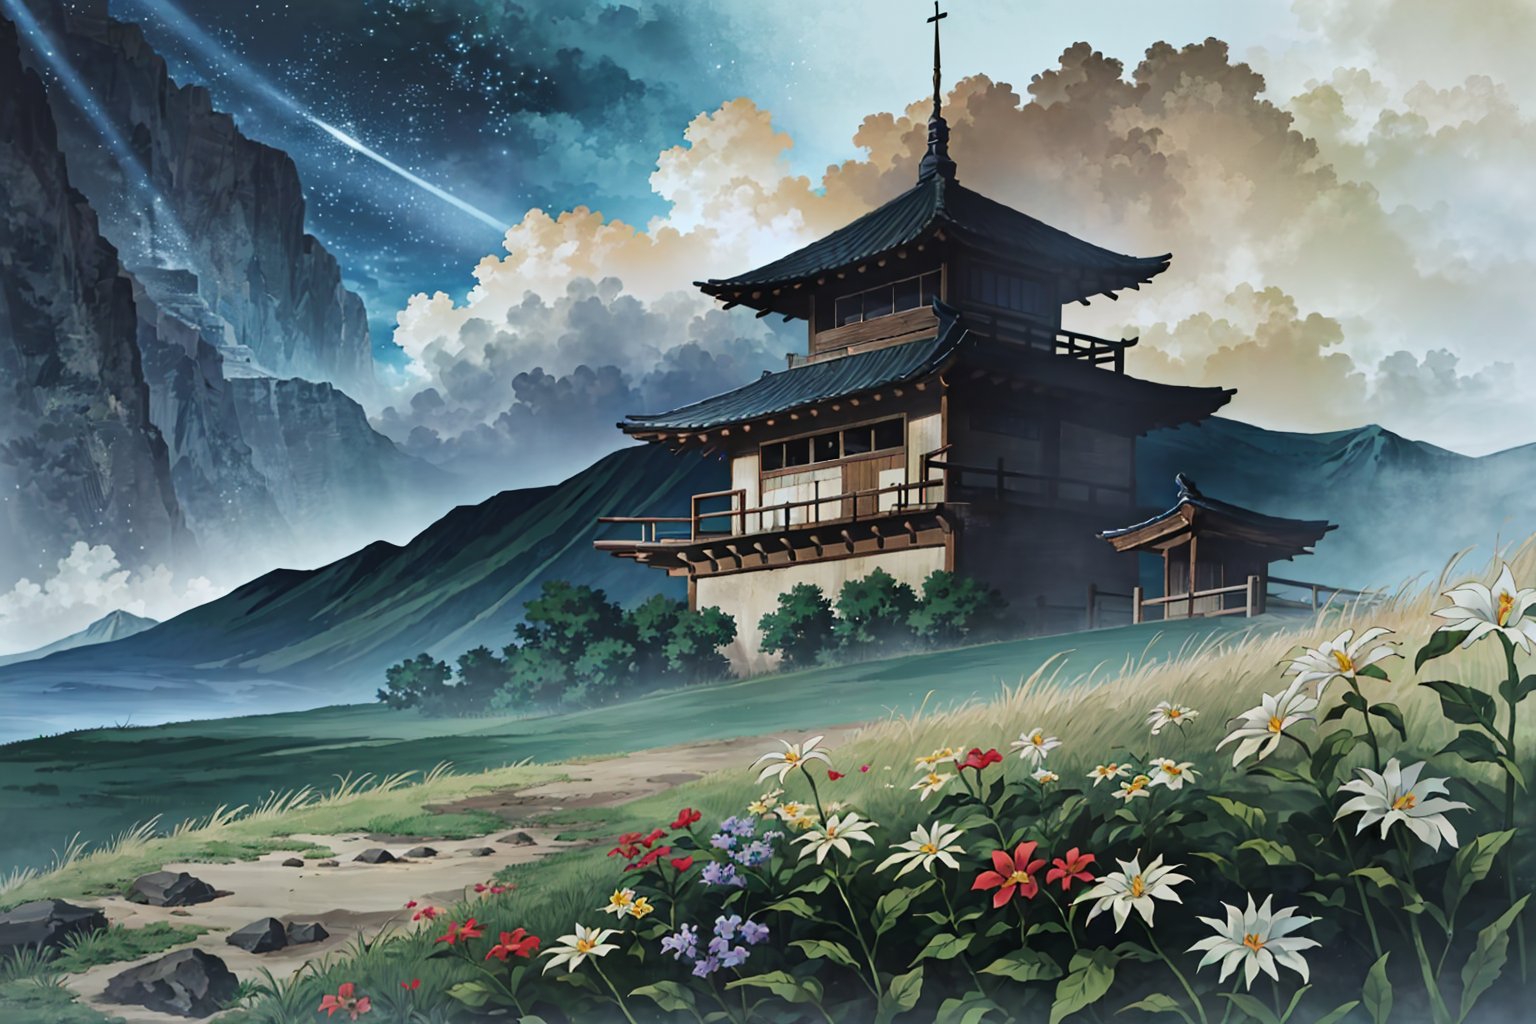 (Masterpiece, Best Quality:1.2), highres, official art, Ninjascroll, (Traditional media), manga,(ultra-detailed landscape), ((8k resolution wallpaper)), fantasy setting, (full angle view:1.2), (no humans:1.3), (anime screen:1.1), cinemascope aspect ratio, HDR, bloom:0.7 bokeh:0.3, (night sky, night, dark:1.3), (perfect shadows), fantasy, (gradients), floating particles, gorgeous, dynamic, [extremely detailed background], (textured), (patterned), nature, (scenery), paradise, field, multi-colored (flowers), tree, sky, grass, valley, cliff, east asian architecture, building, [wood], cinematic lighting:1.1, film grain:0.6, ( Fujifilm XT3 ), water, inverted reflection, wind, (atmosphere), rolling fog, bamboo forest in distance, outdoors, (ancient ruins), gorgeous mountainous horizon, darkness, volumetric lighting, 85mm, (shallow depth of field), intricate, (details:1.2), perfect composition:1.1,  <lora:NinjaScroll-10:0.8>,  <lora:epiNoiseoffset_v2:0.4>